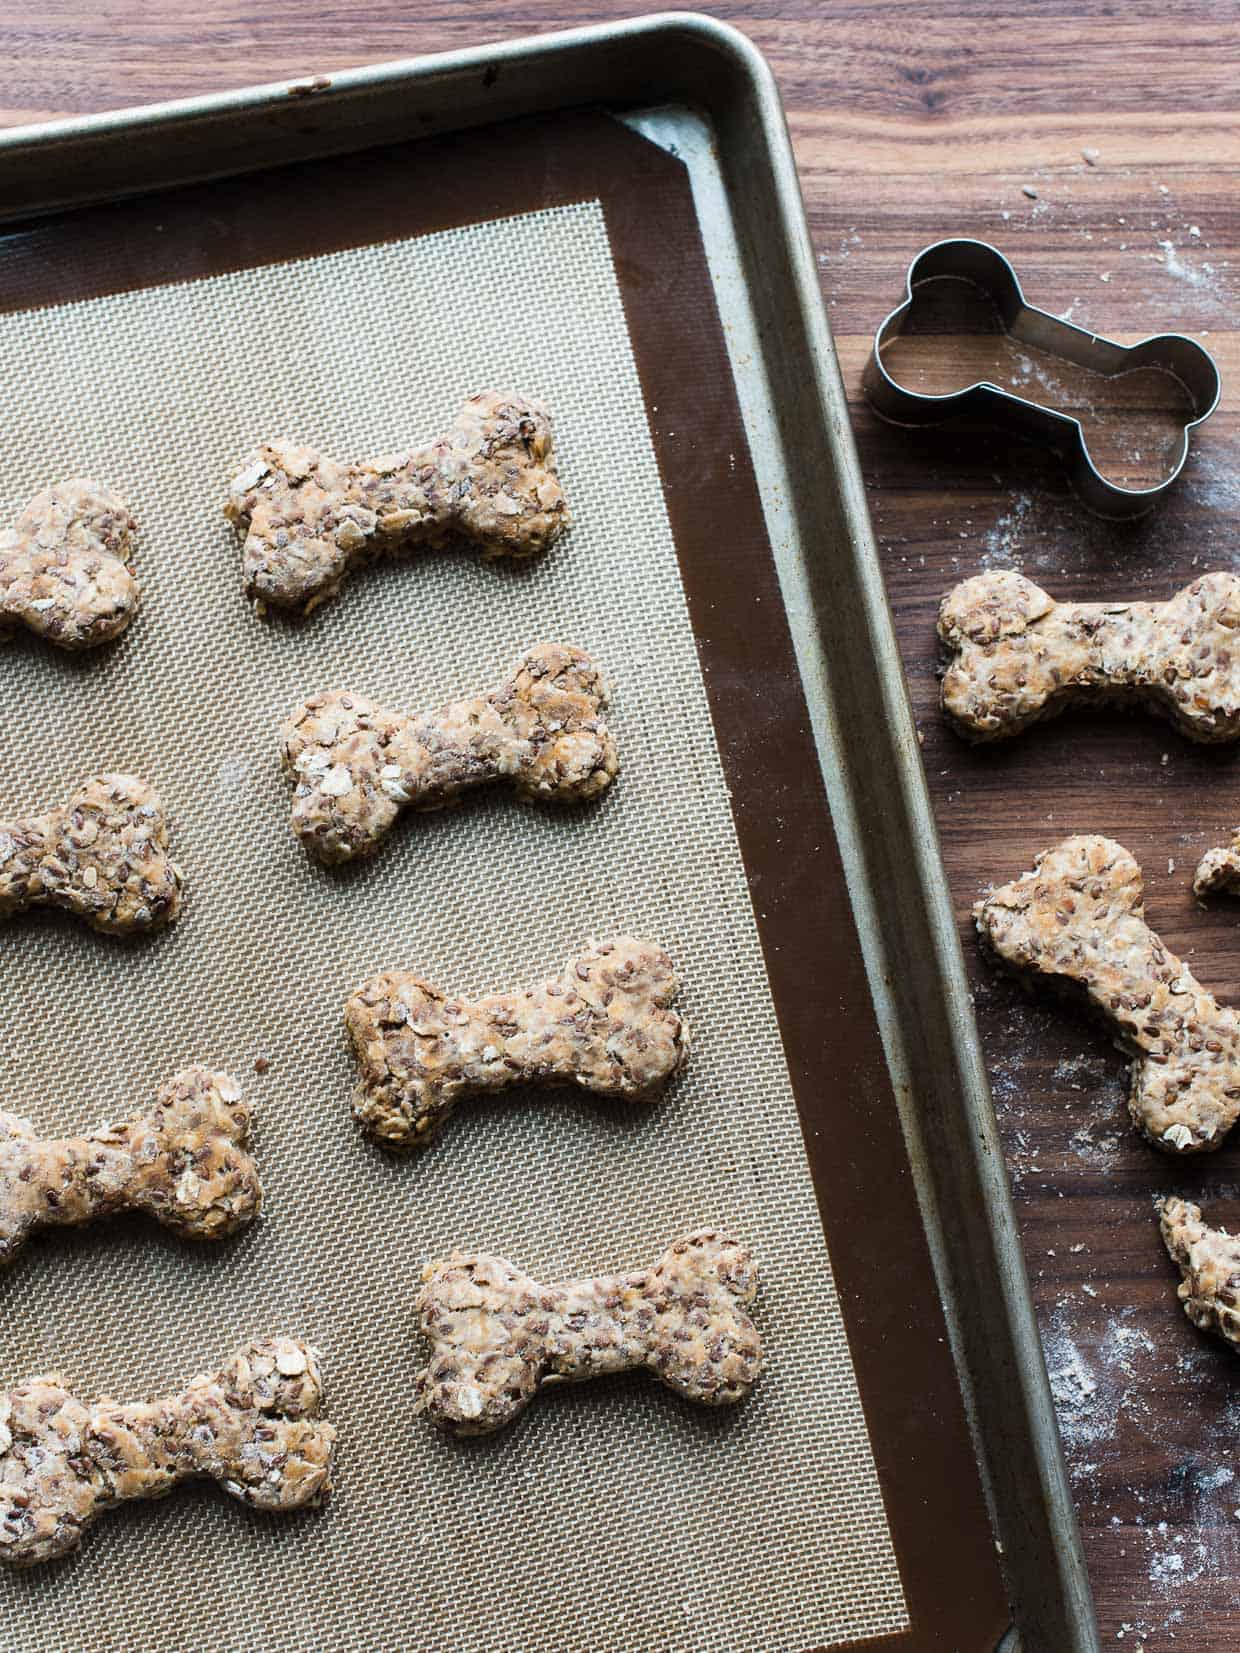 Cutting out homemade dog biscuits with a cookie cutter.